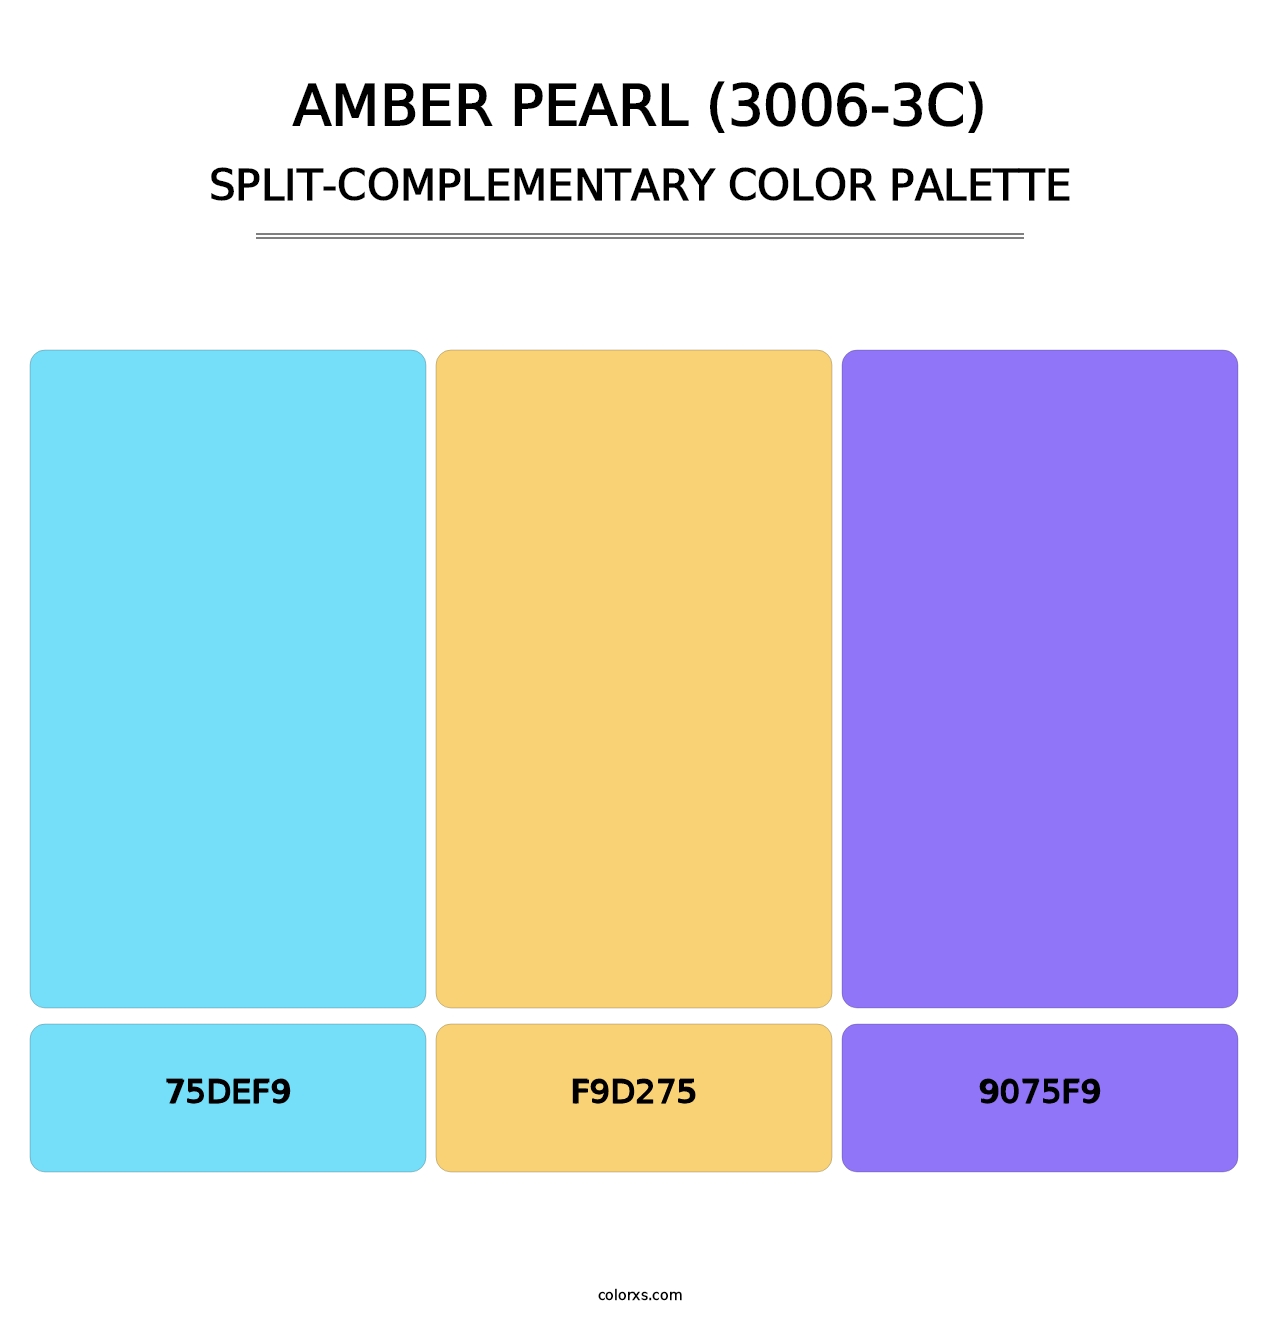 Amber Pearl (3006-3C) - Split-Complementary Color Palette